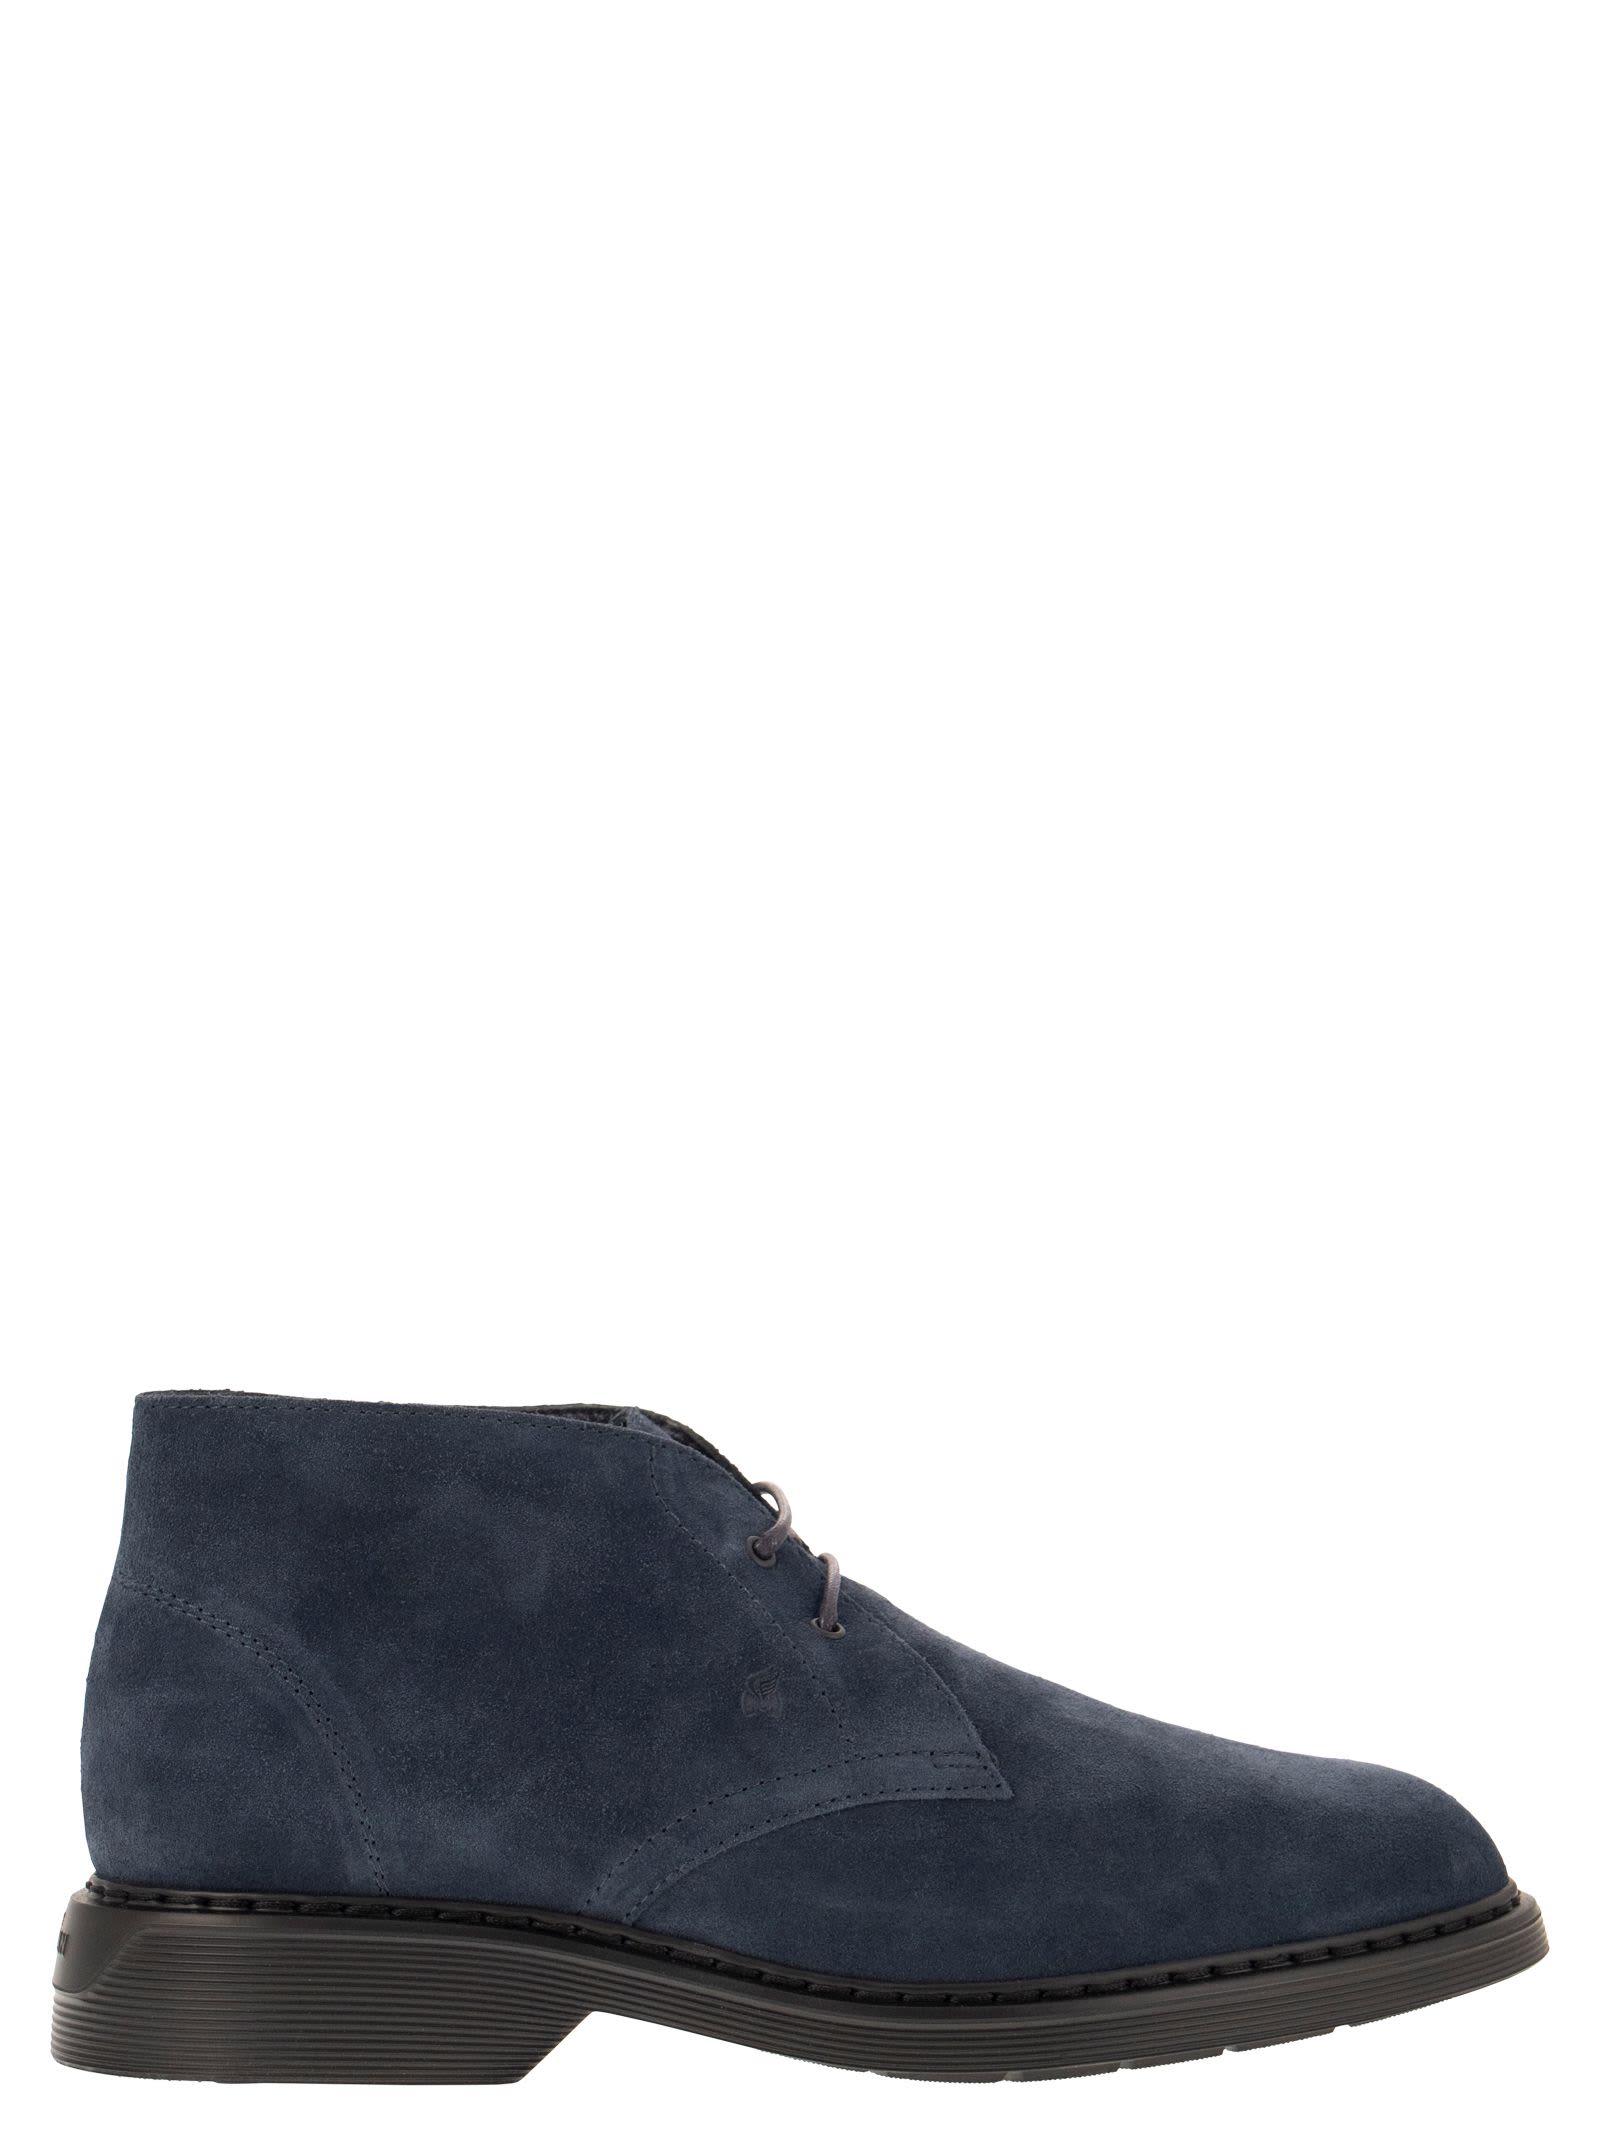 H576 - Suede Ankle Boots